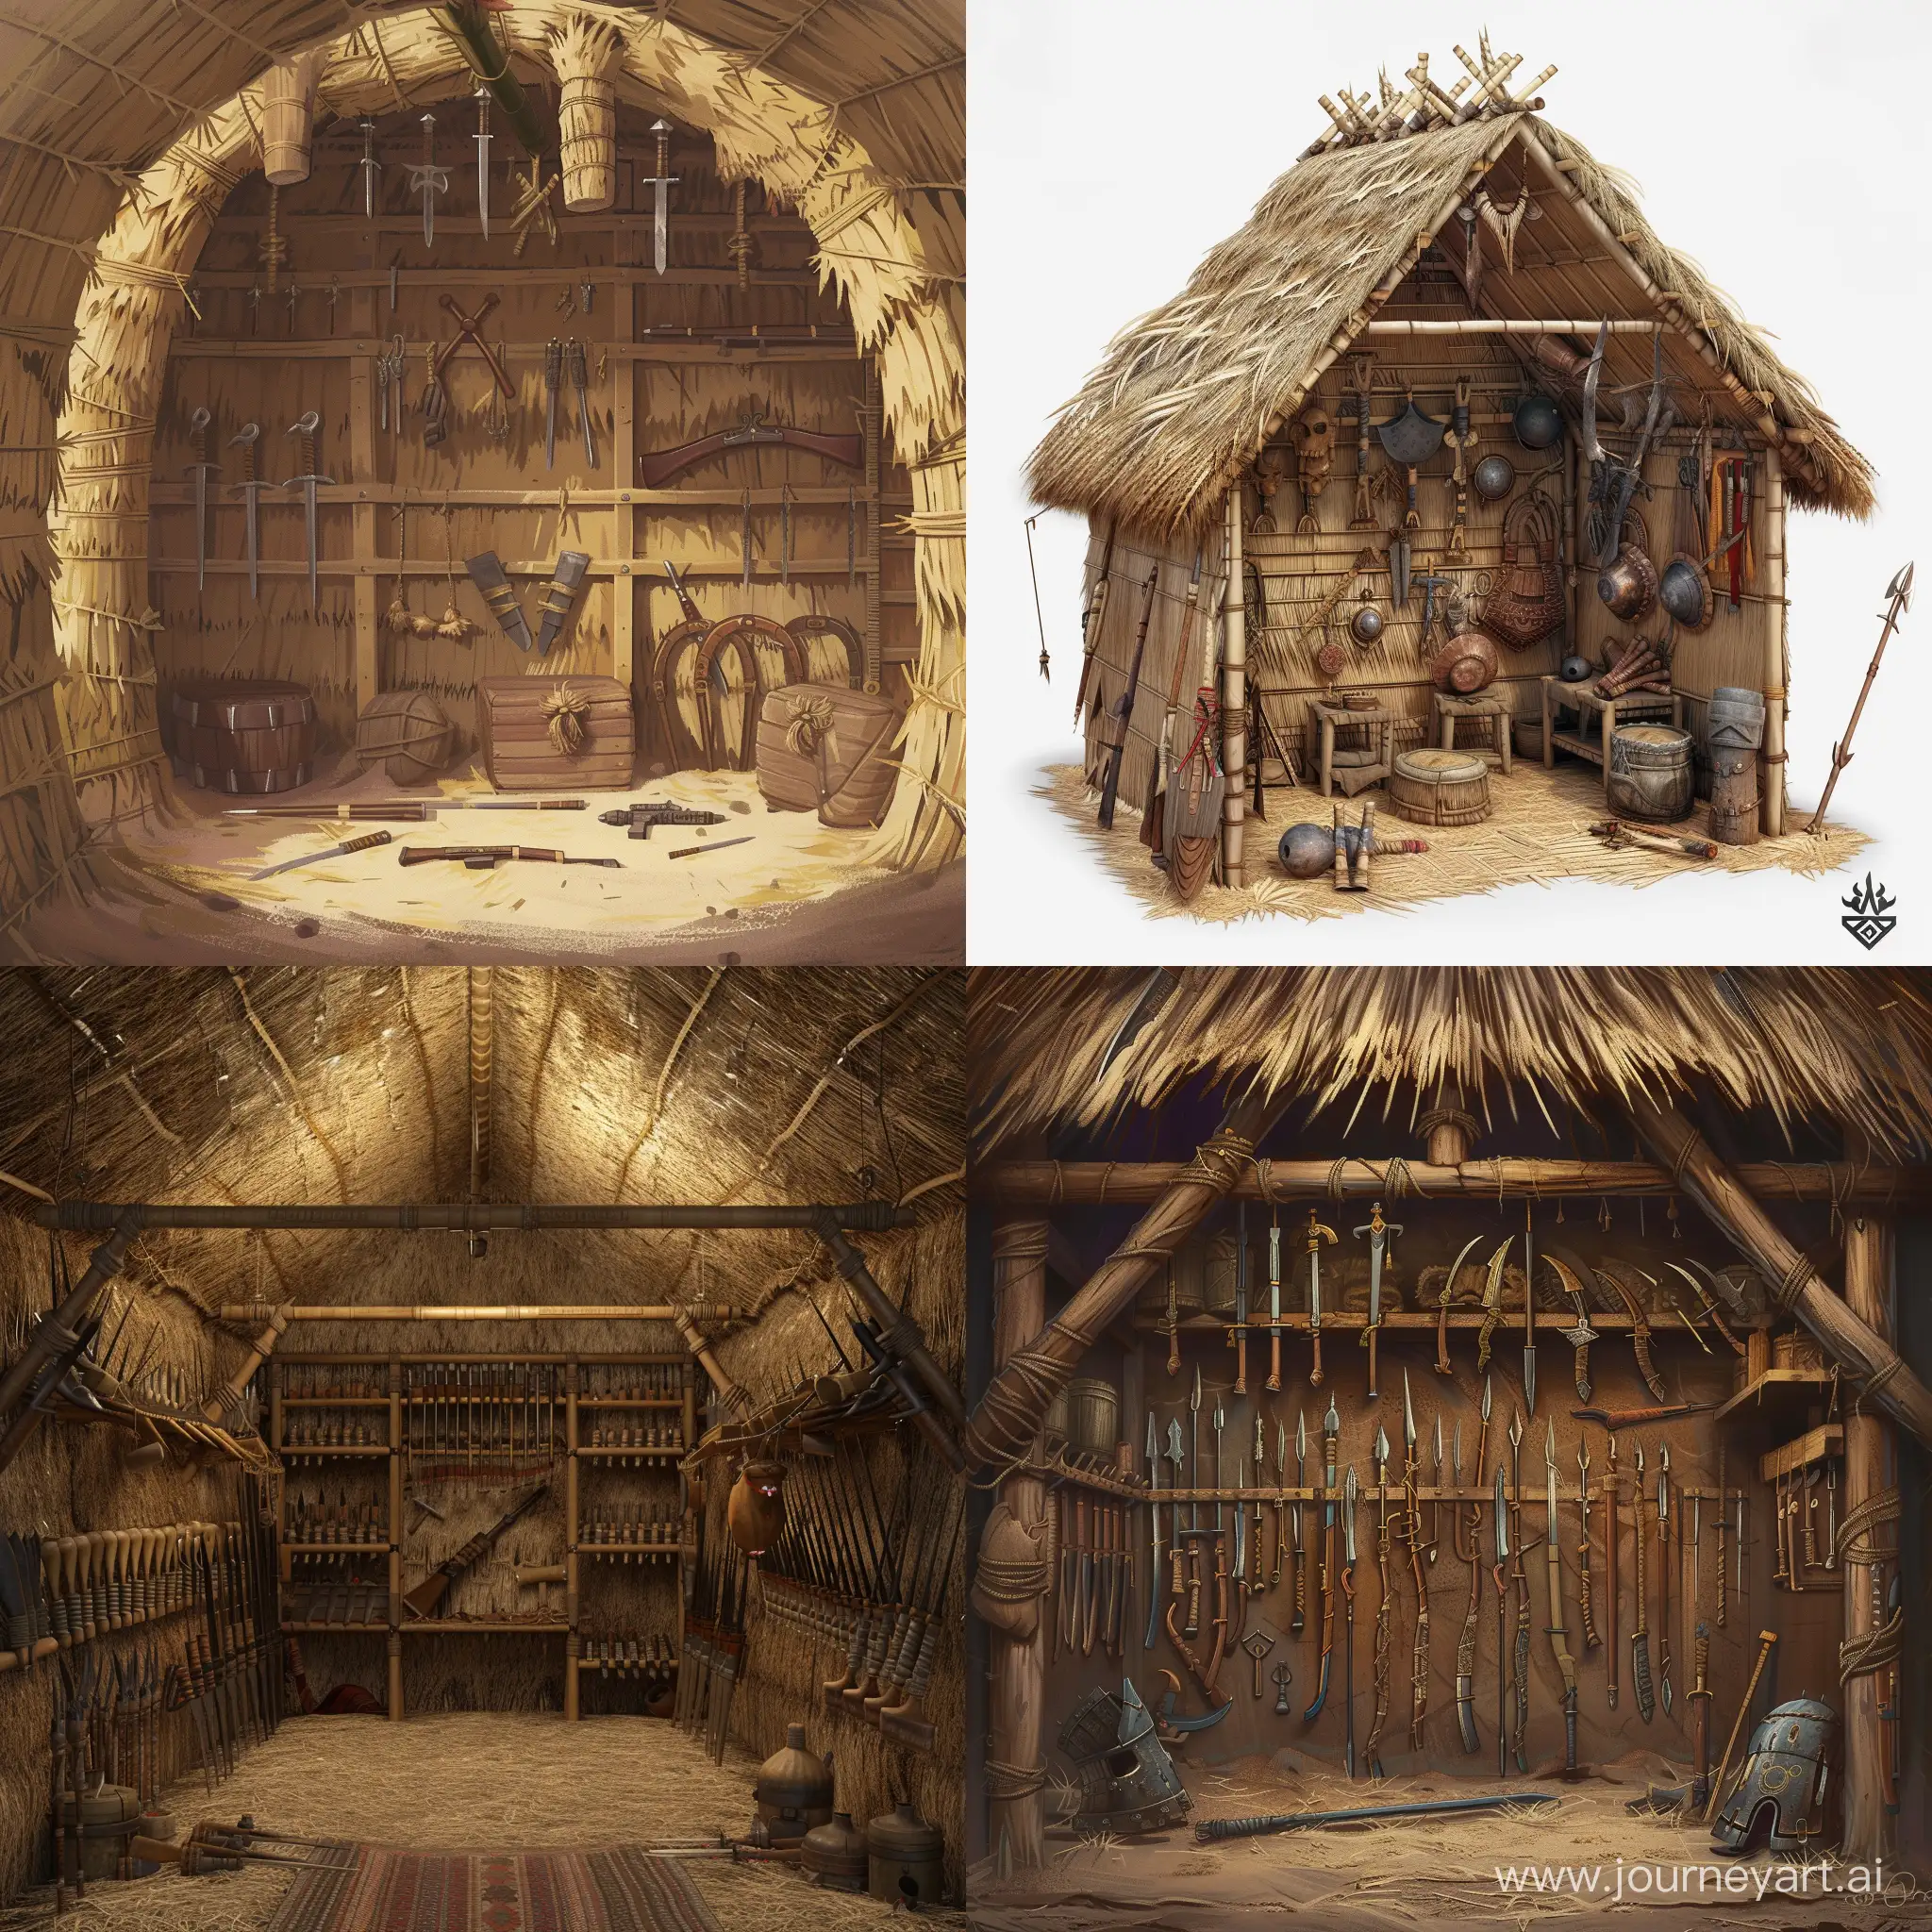 create an image of the inside of a straw tribal hut that's used as an armory. the armory is on hard times, it should have low quality crude weapons and armor that barely should qualify as armor and weapons 